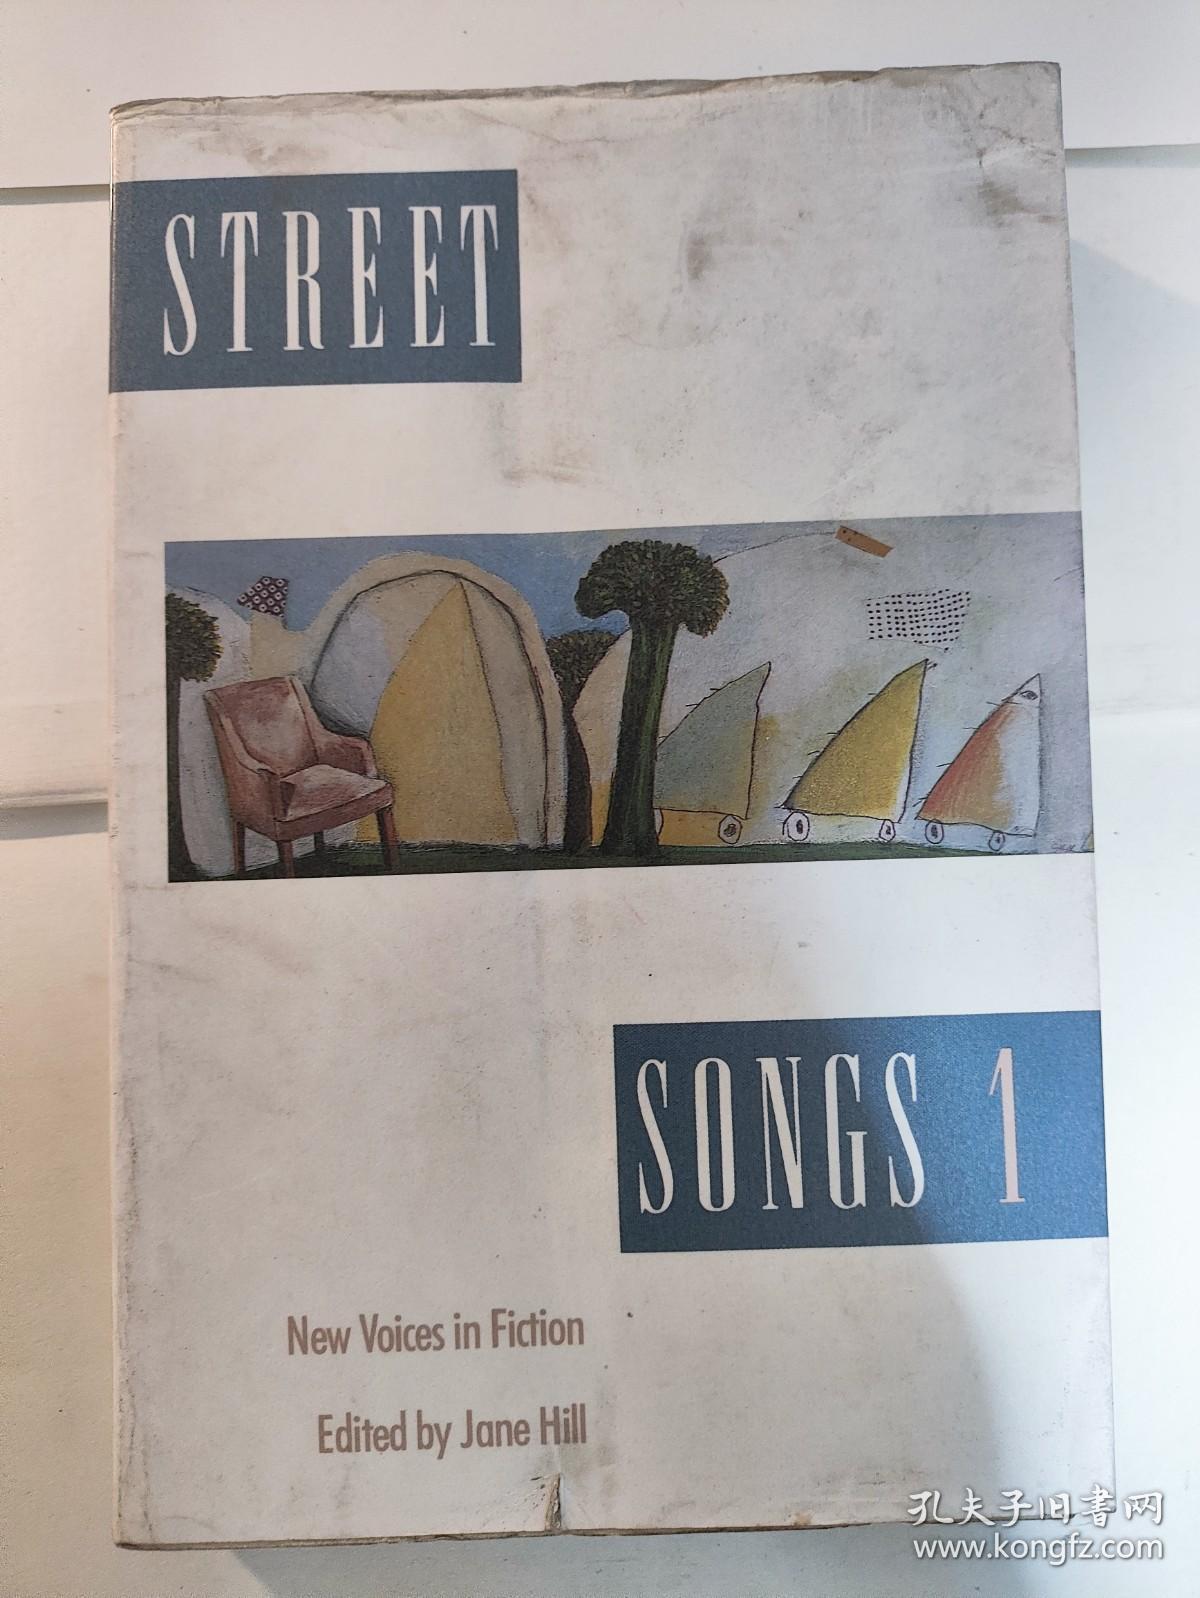 Street Songs 1: New Voices in Fiction